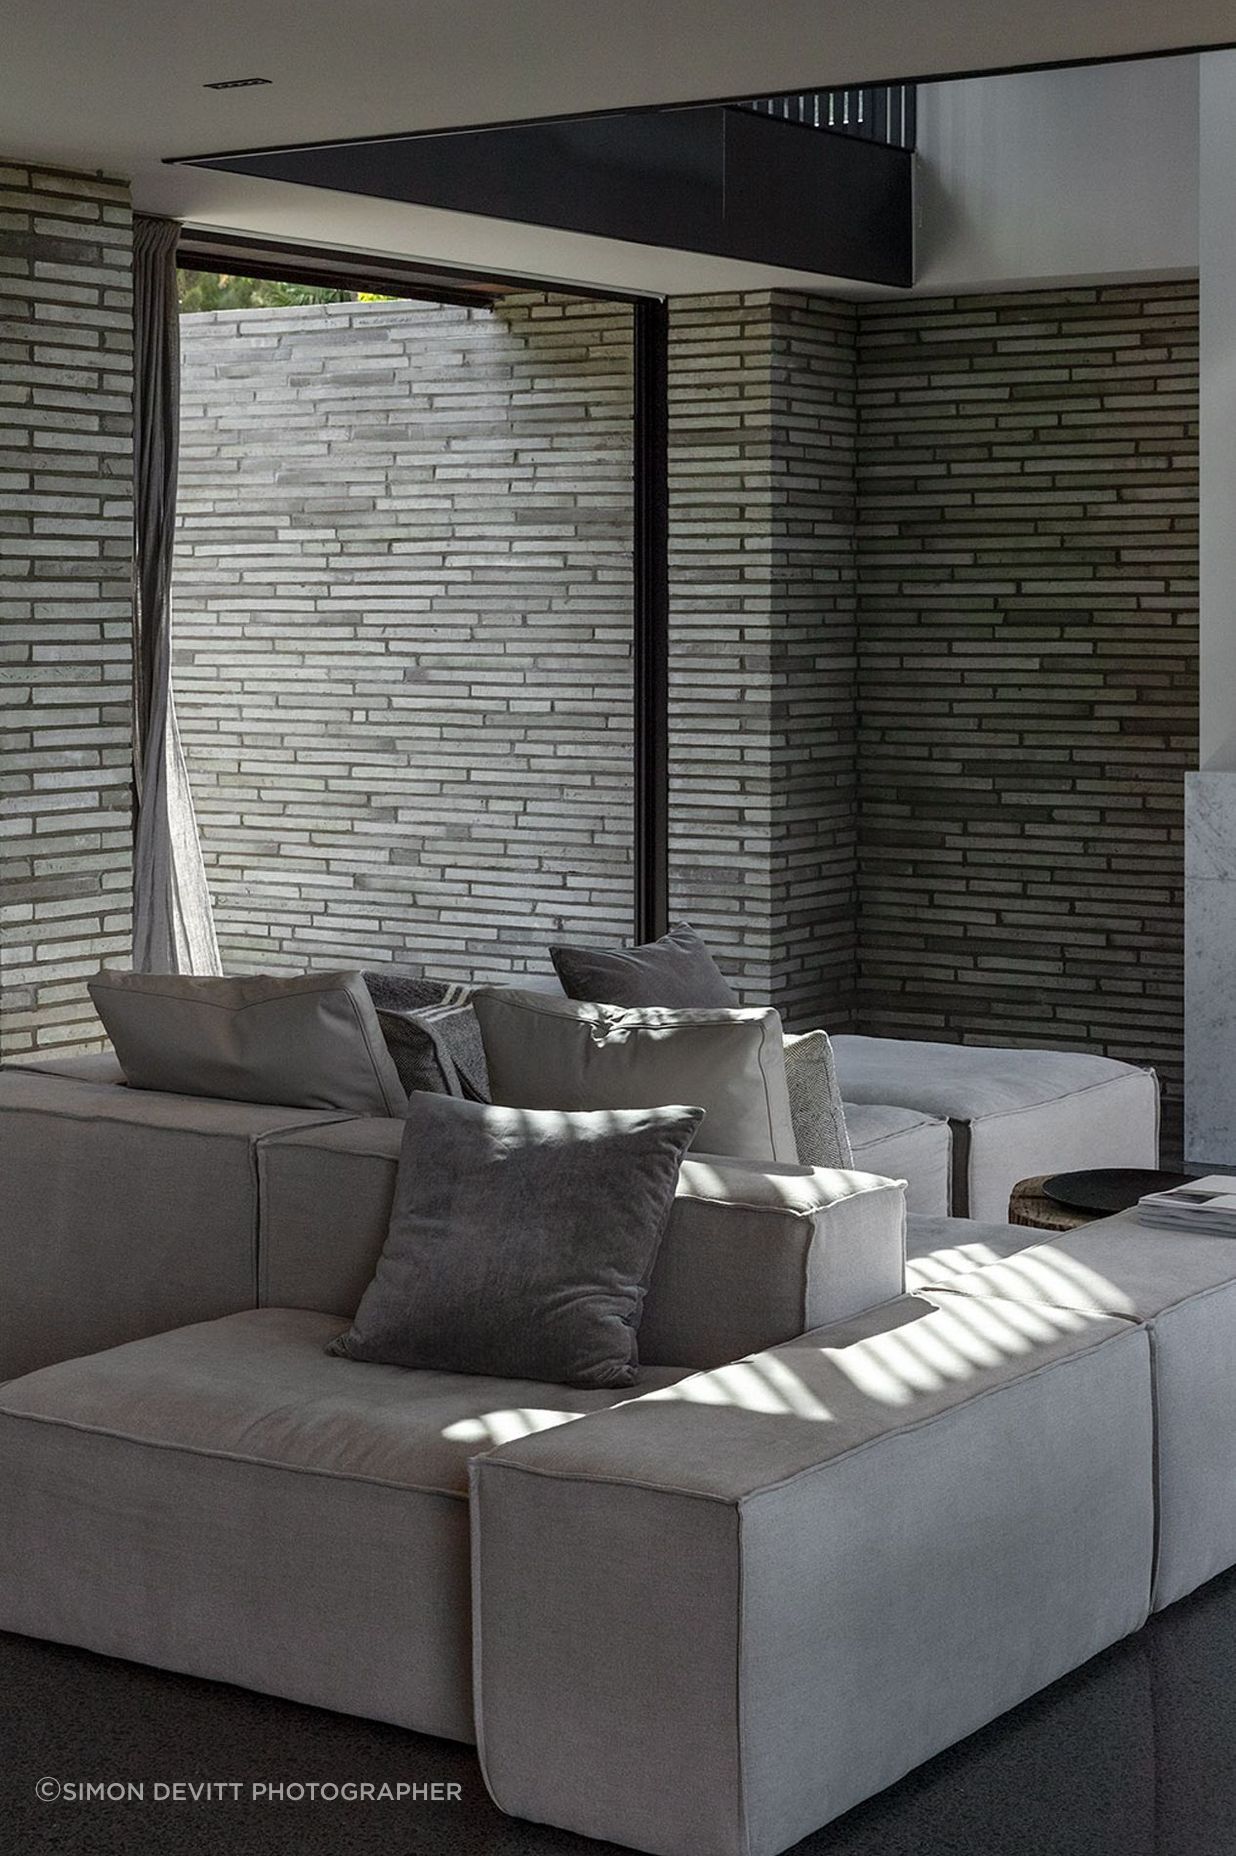 A muted colour palette gives way to a layering of texture and material to create a sense of calm.